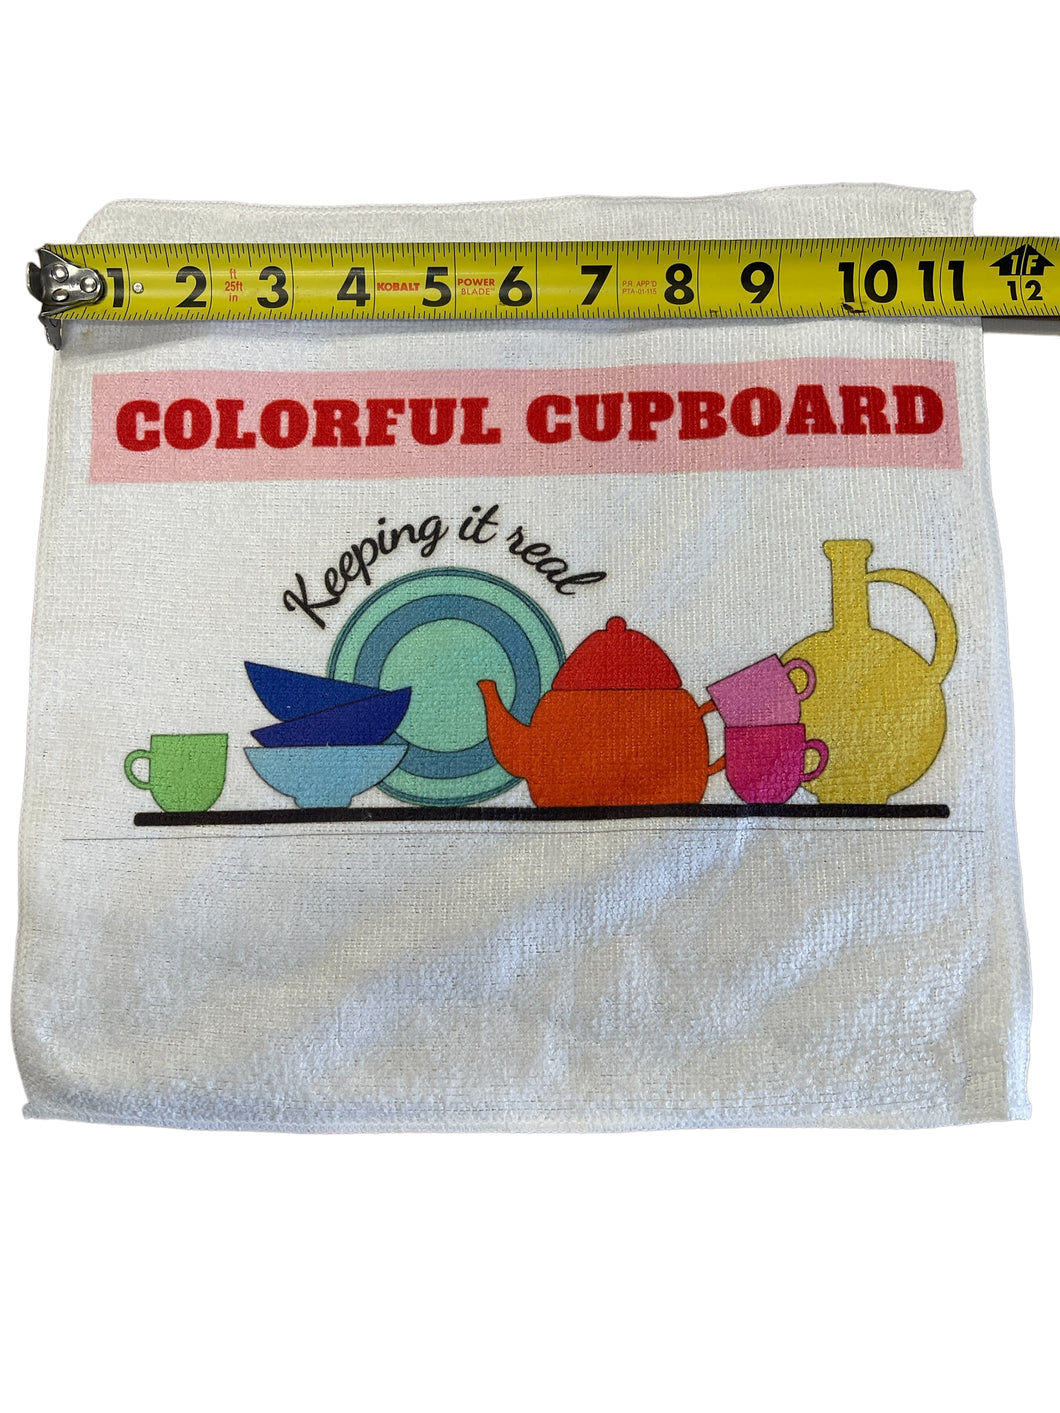 Colorful Cupboard Items Towel, Key chain Magnet You get all 3 items